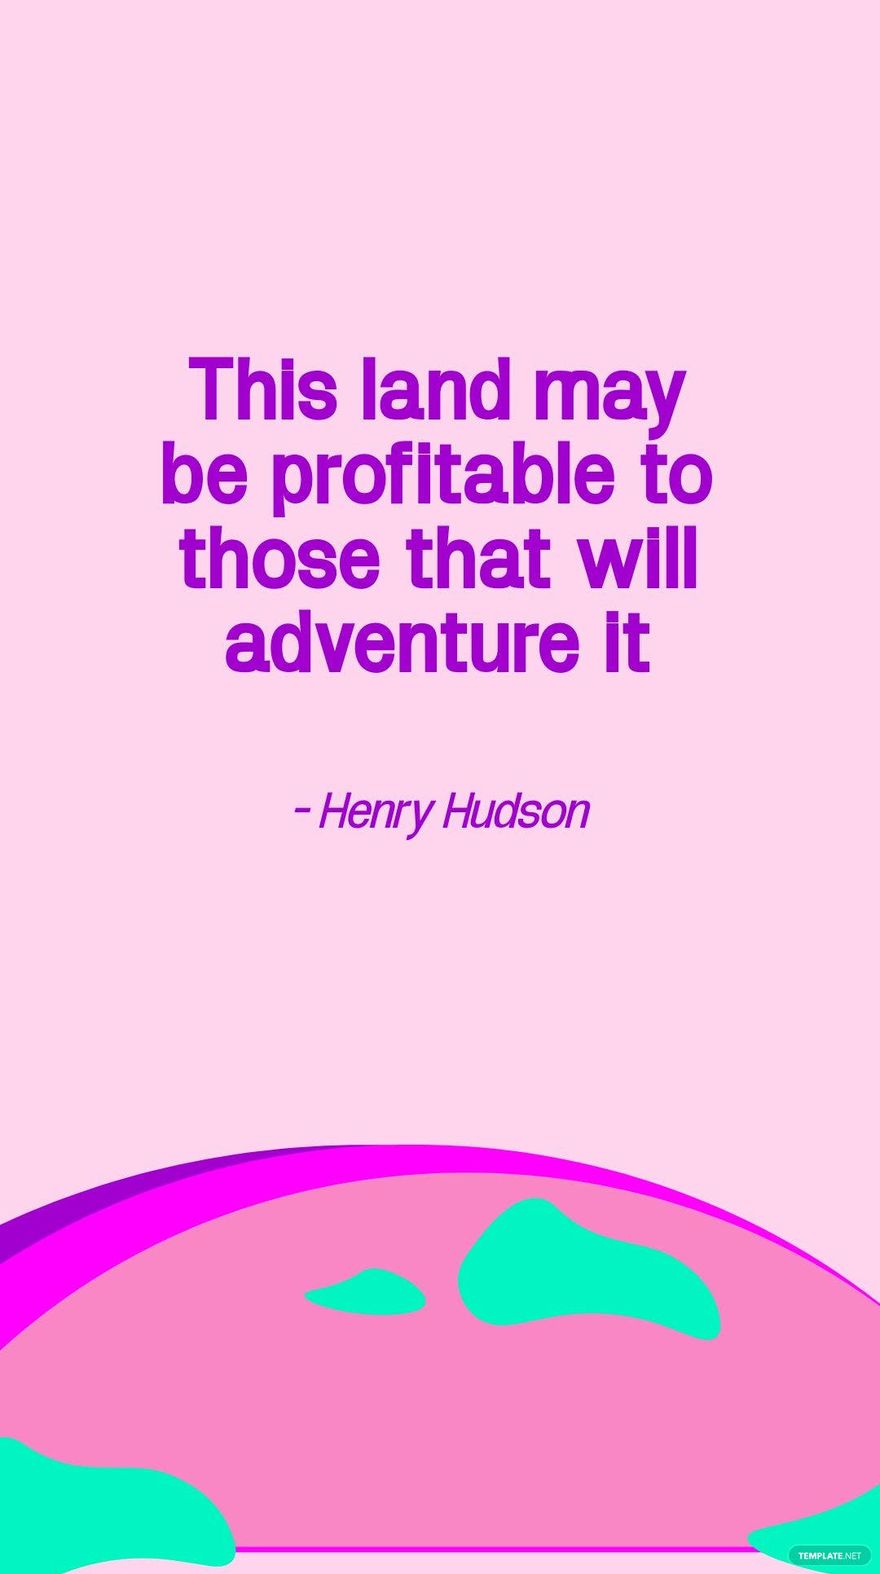 Free Henry Hudson - This land may be profitable to those that will adventure it in JPG